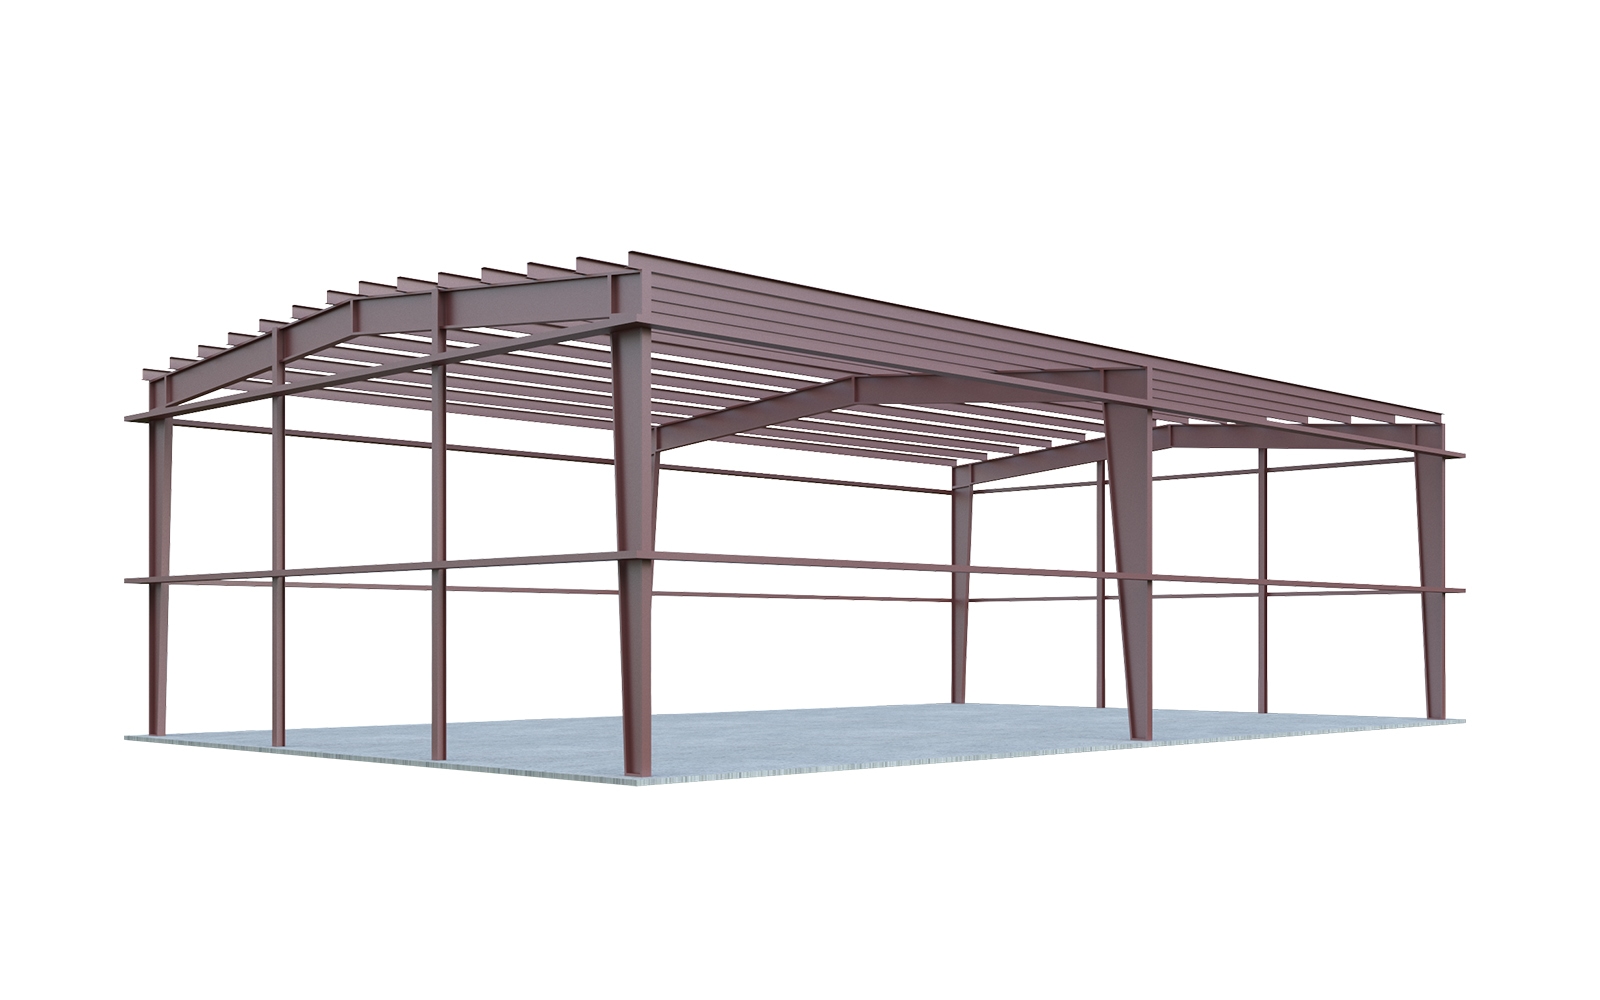 Building Your Own Garage with Steel